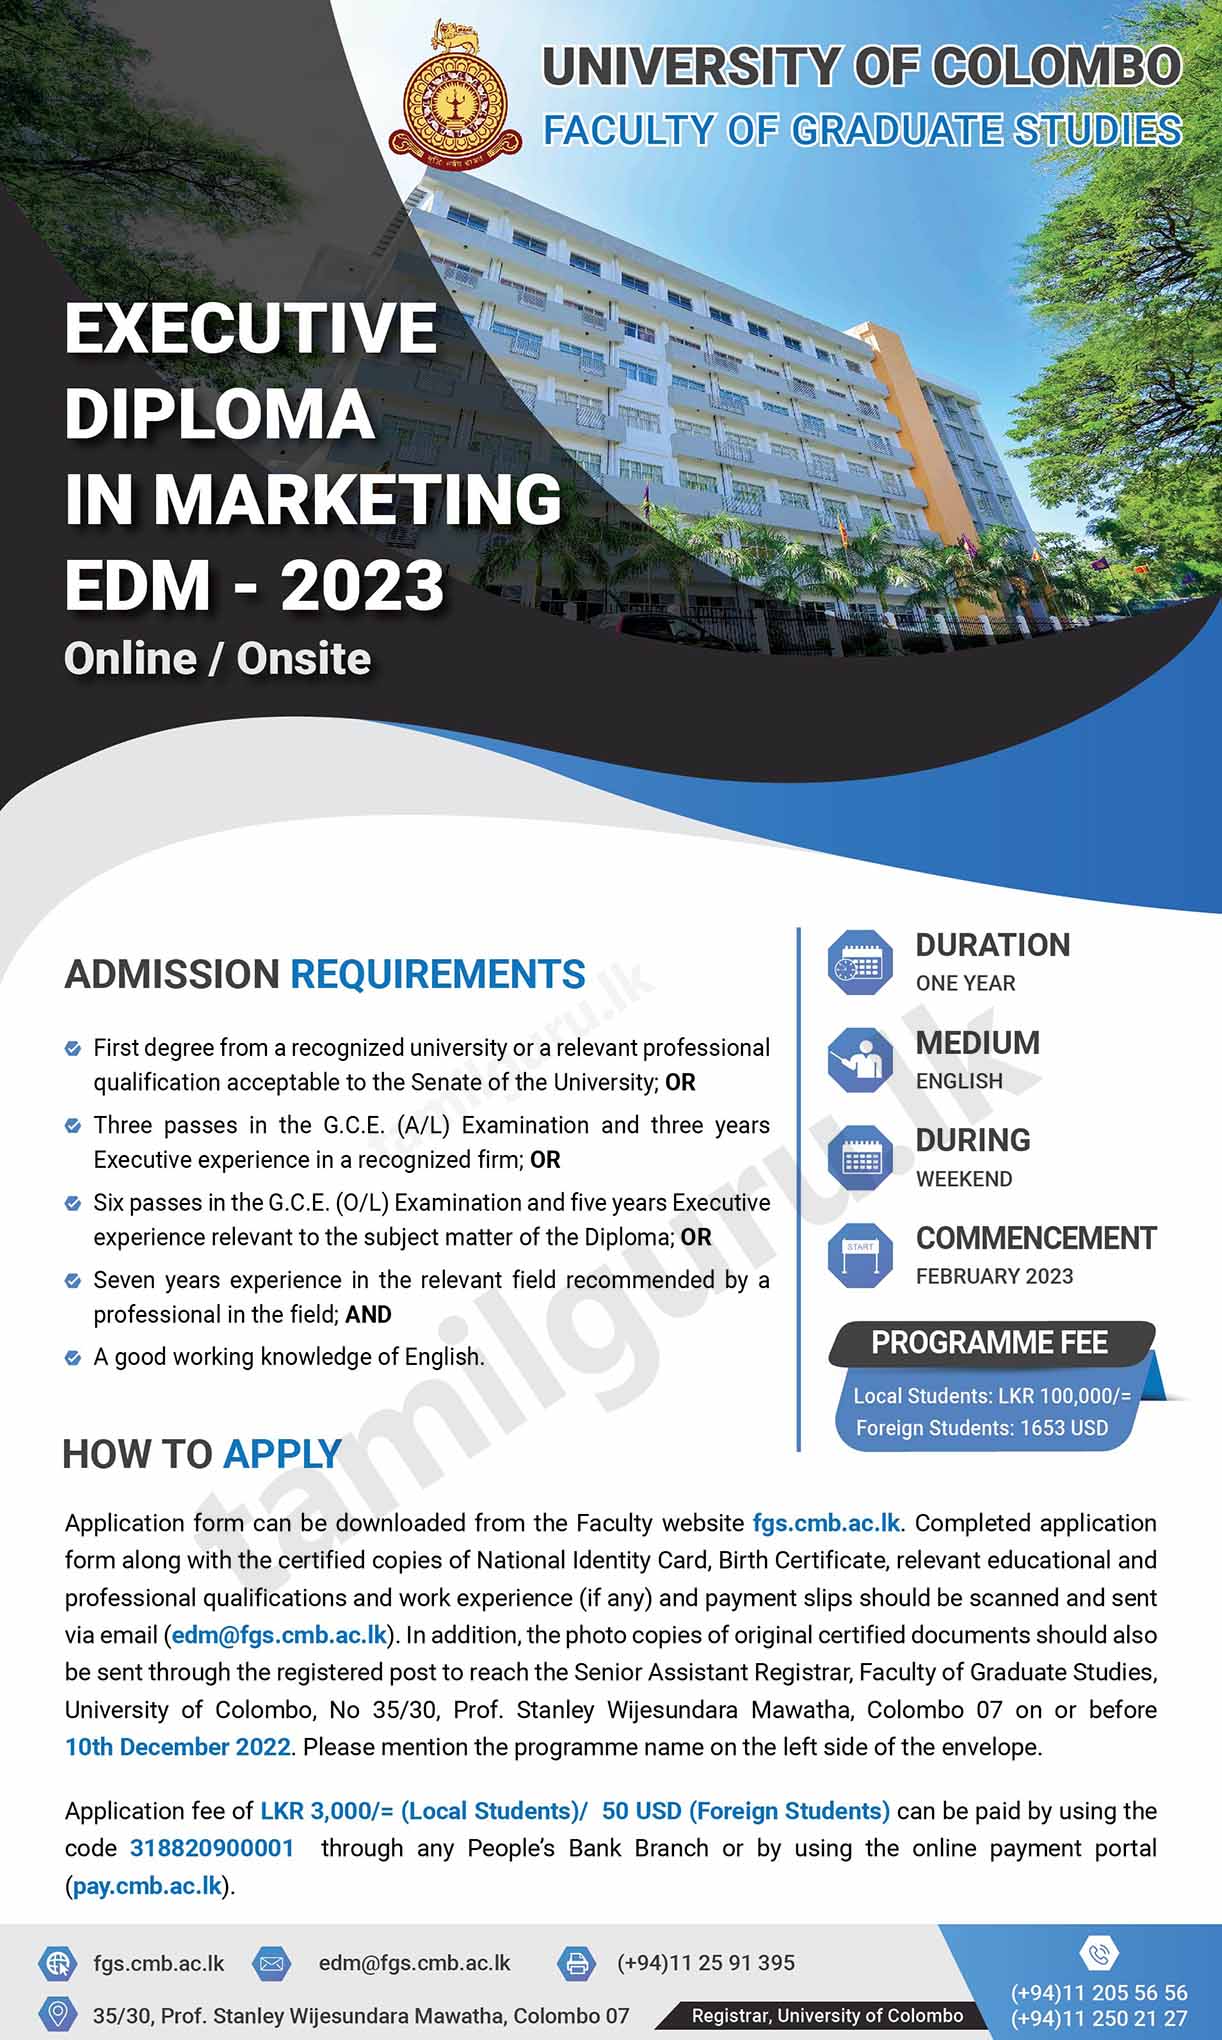 Calling Applications for Executive Diploma in Marketing (EDM) 2023 - University of Colombo